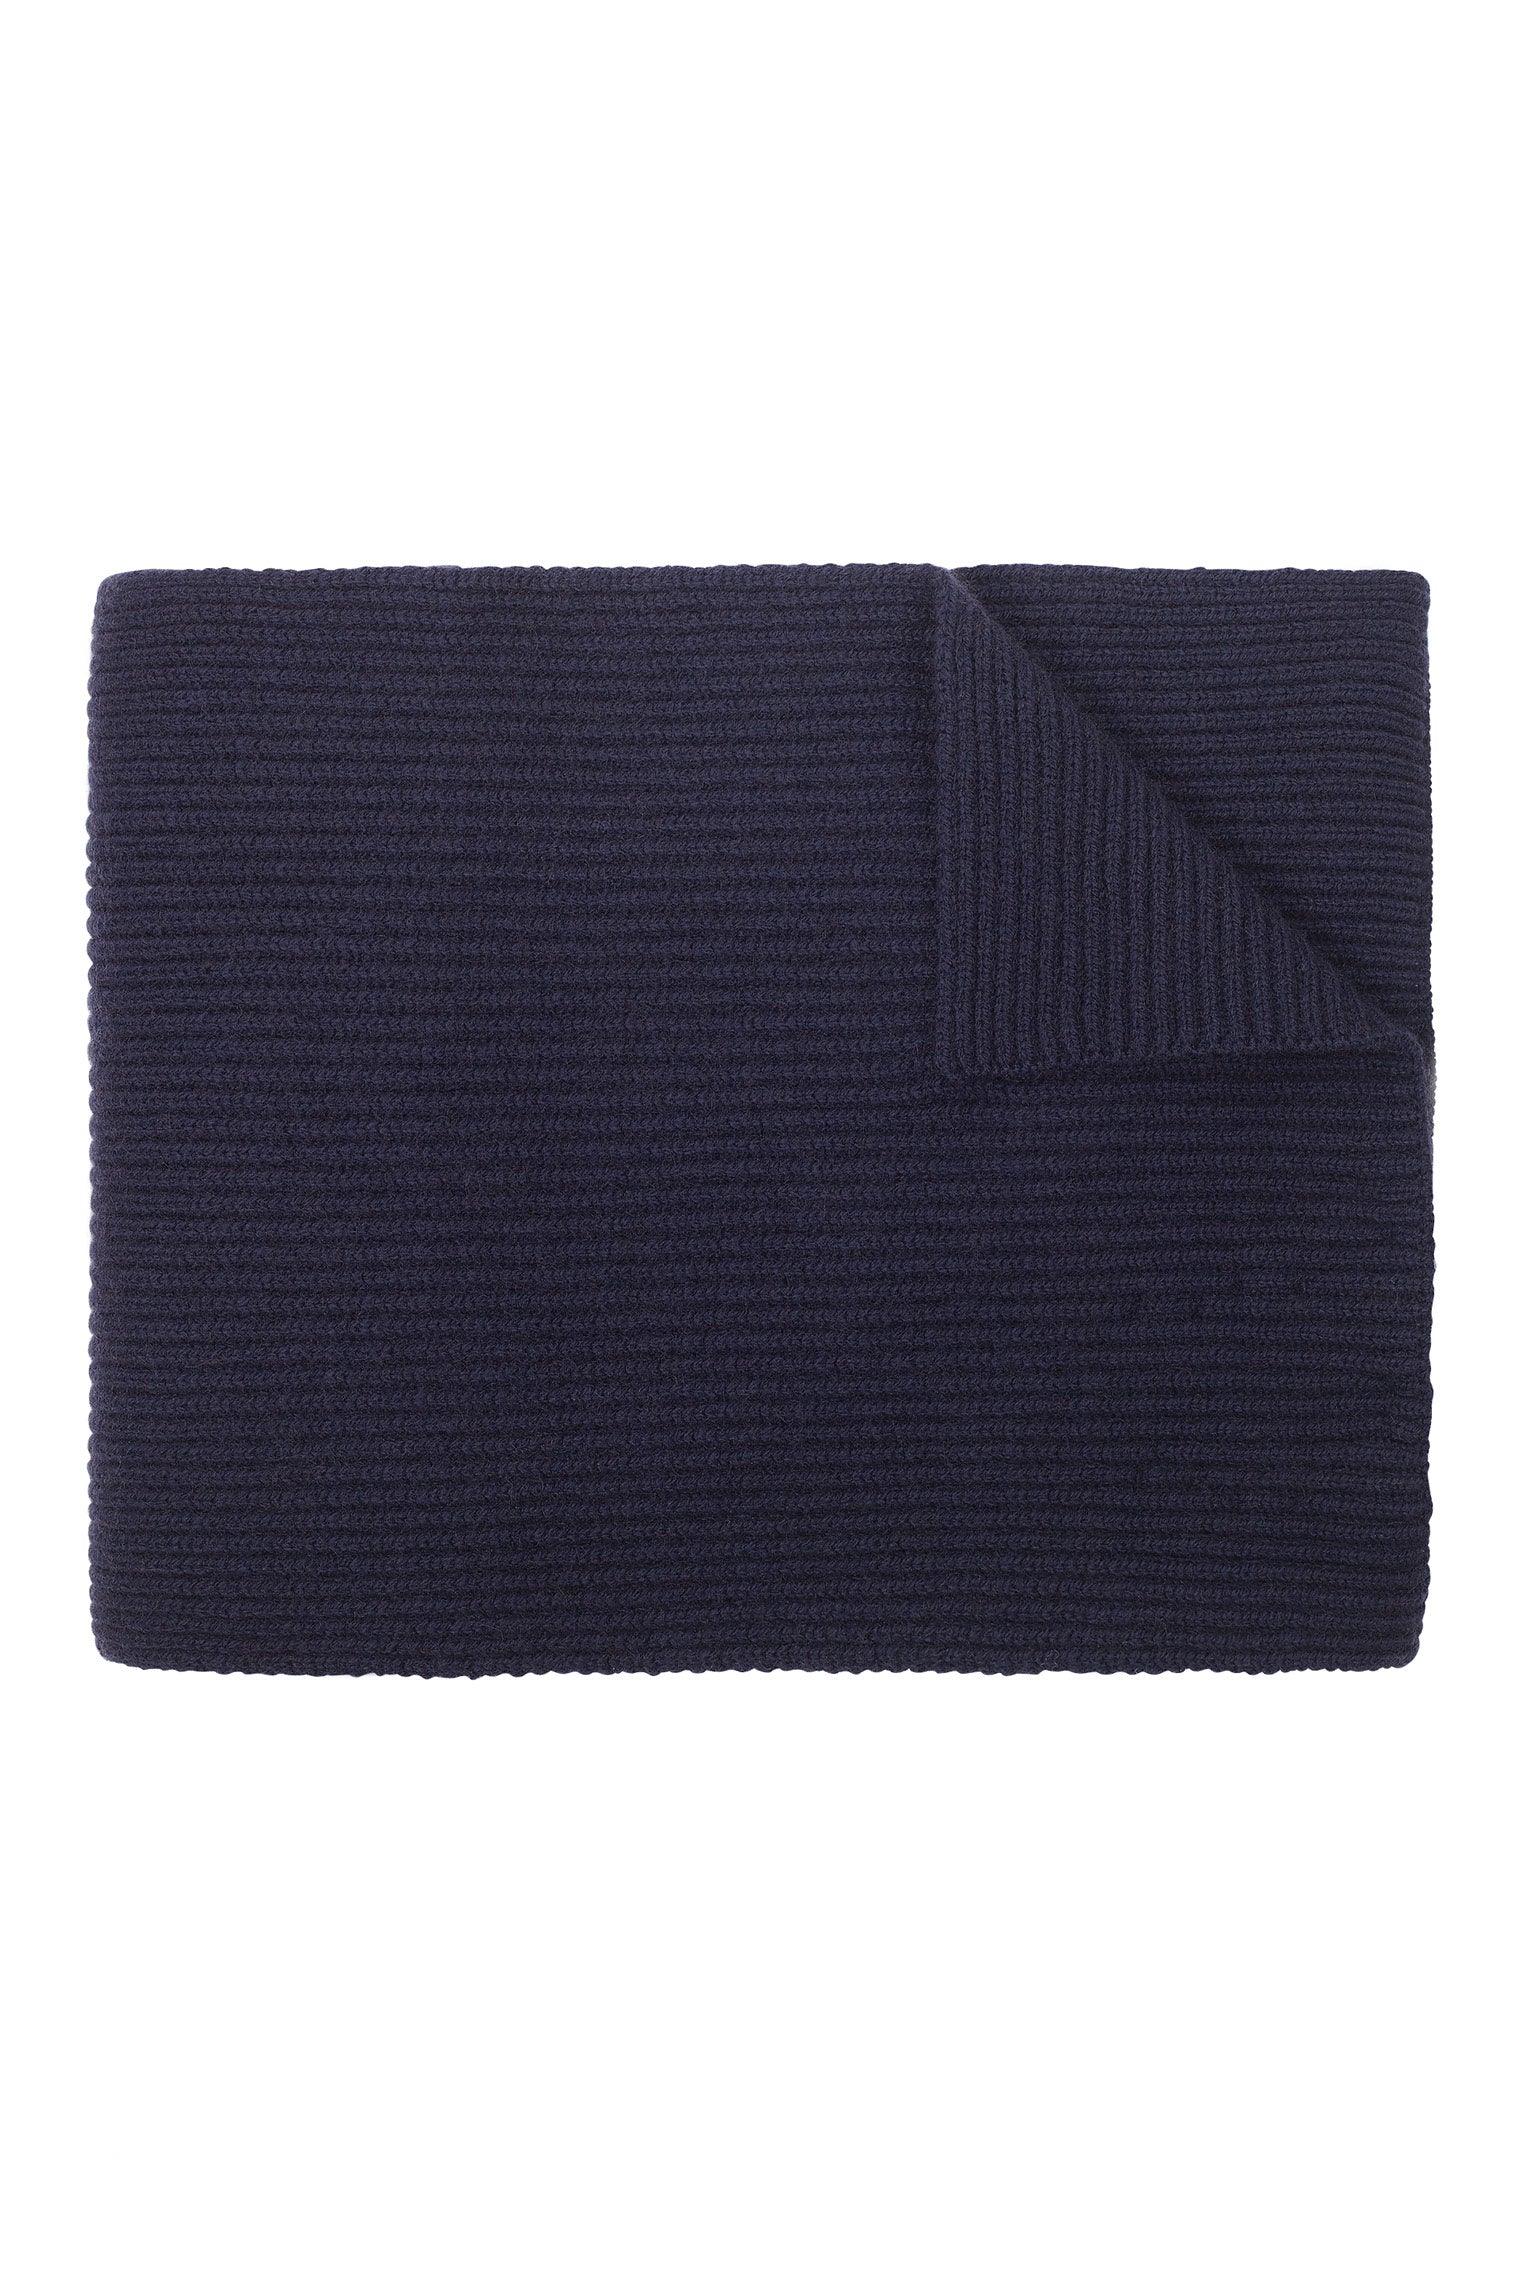 Cashmere Knitted Scarf - You May Also Like - Lock & Co. Hatters London UK